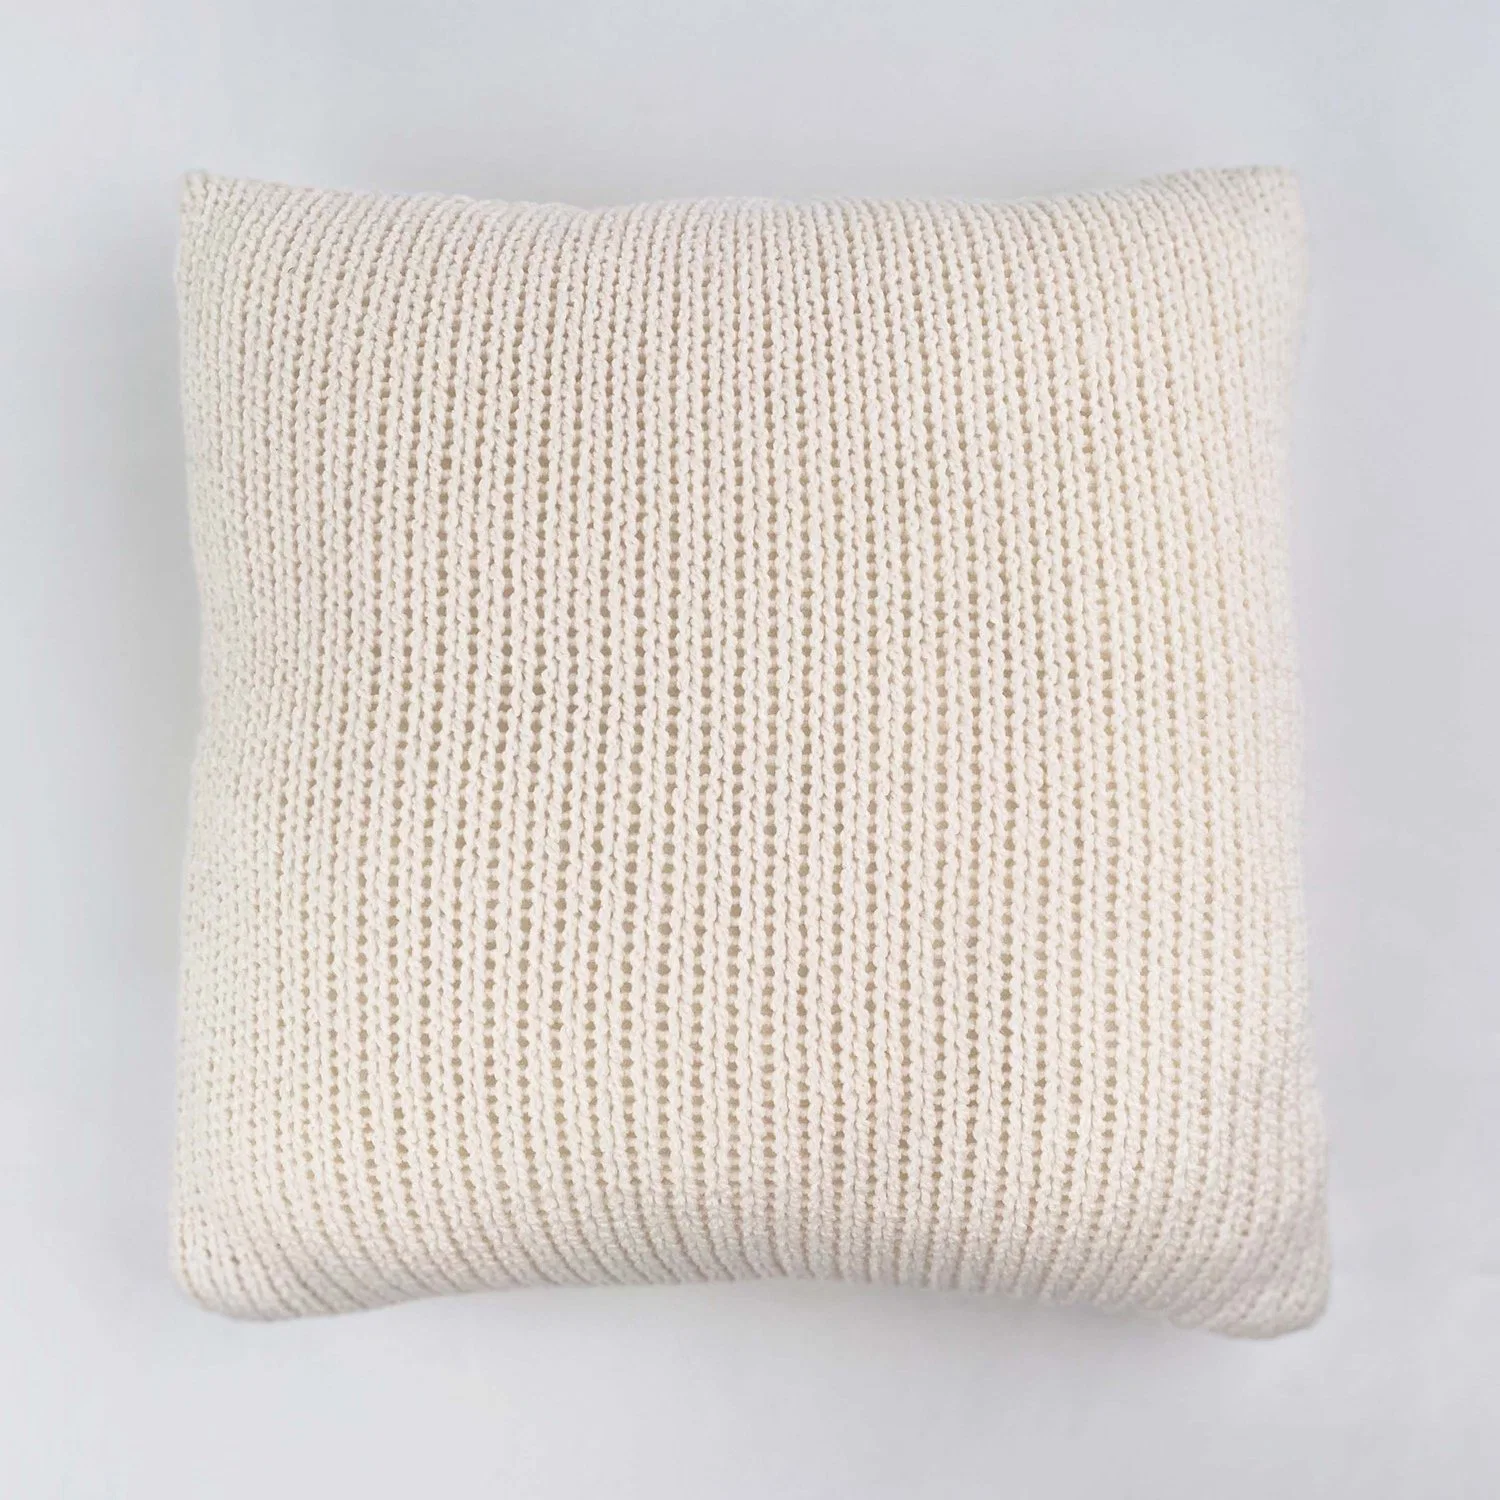 Knit Decorative Throw Pillow Cover Cable Knit Braide Sweater Square Warm Pillowcase Cover for Couch Bed Home Accent 24"X24"Inch Decor Cushion